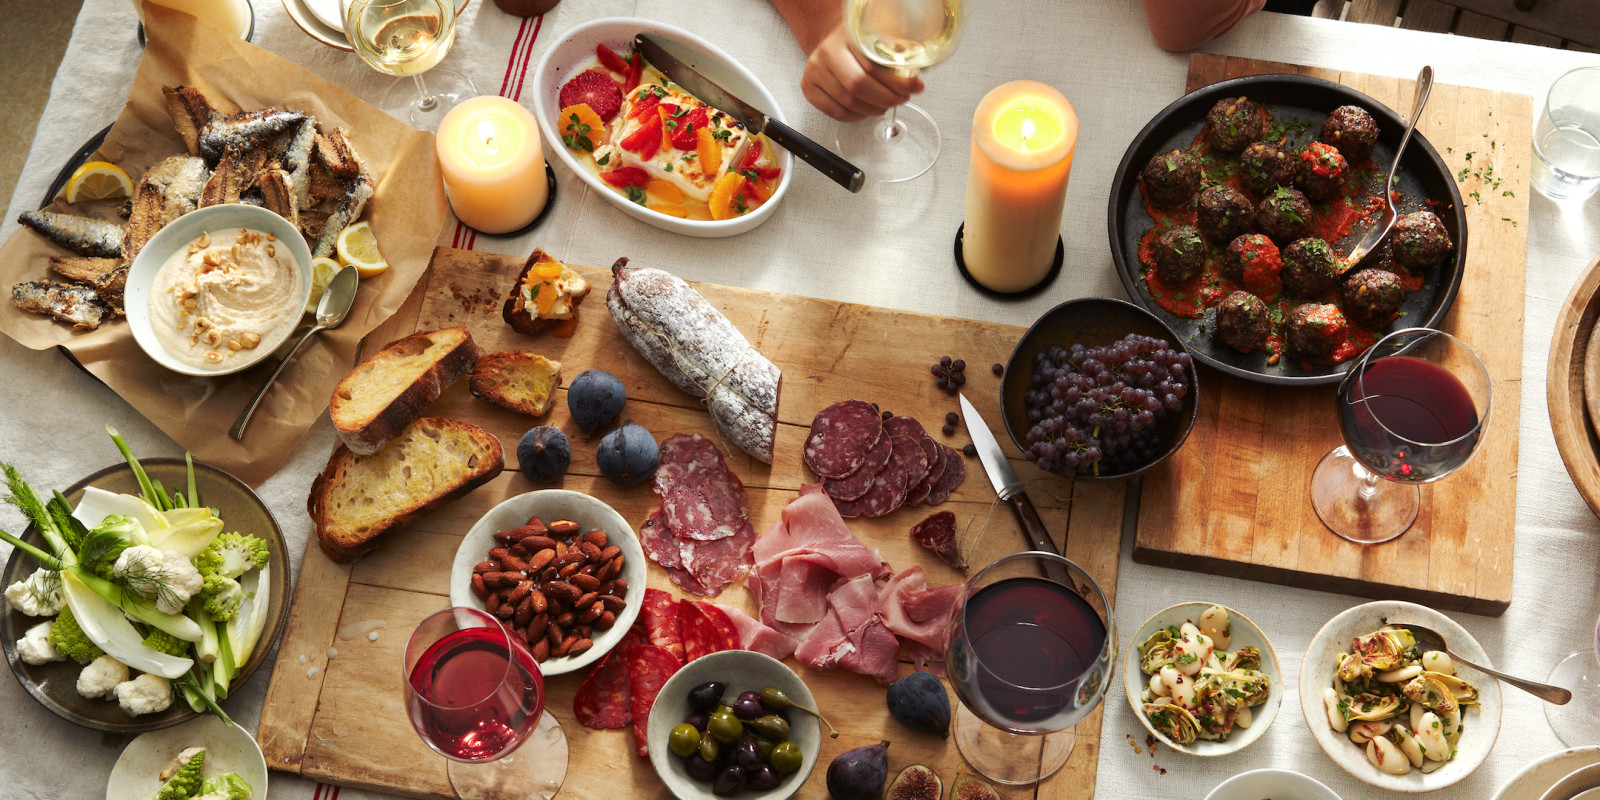 Ideas For A Dinner Party
 How to Host an Instagram Worthy Italian Dinner Party